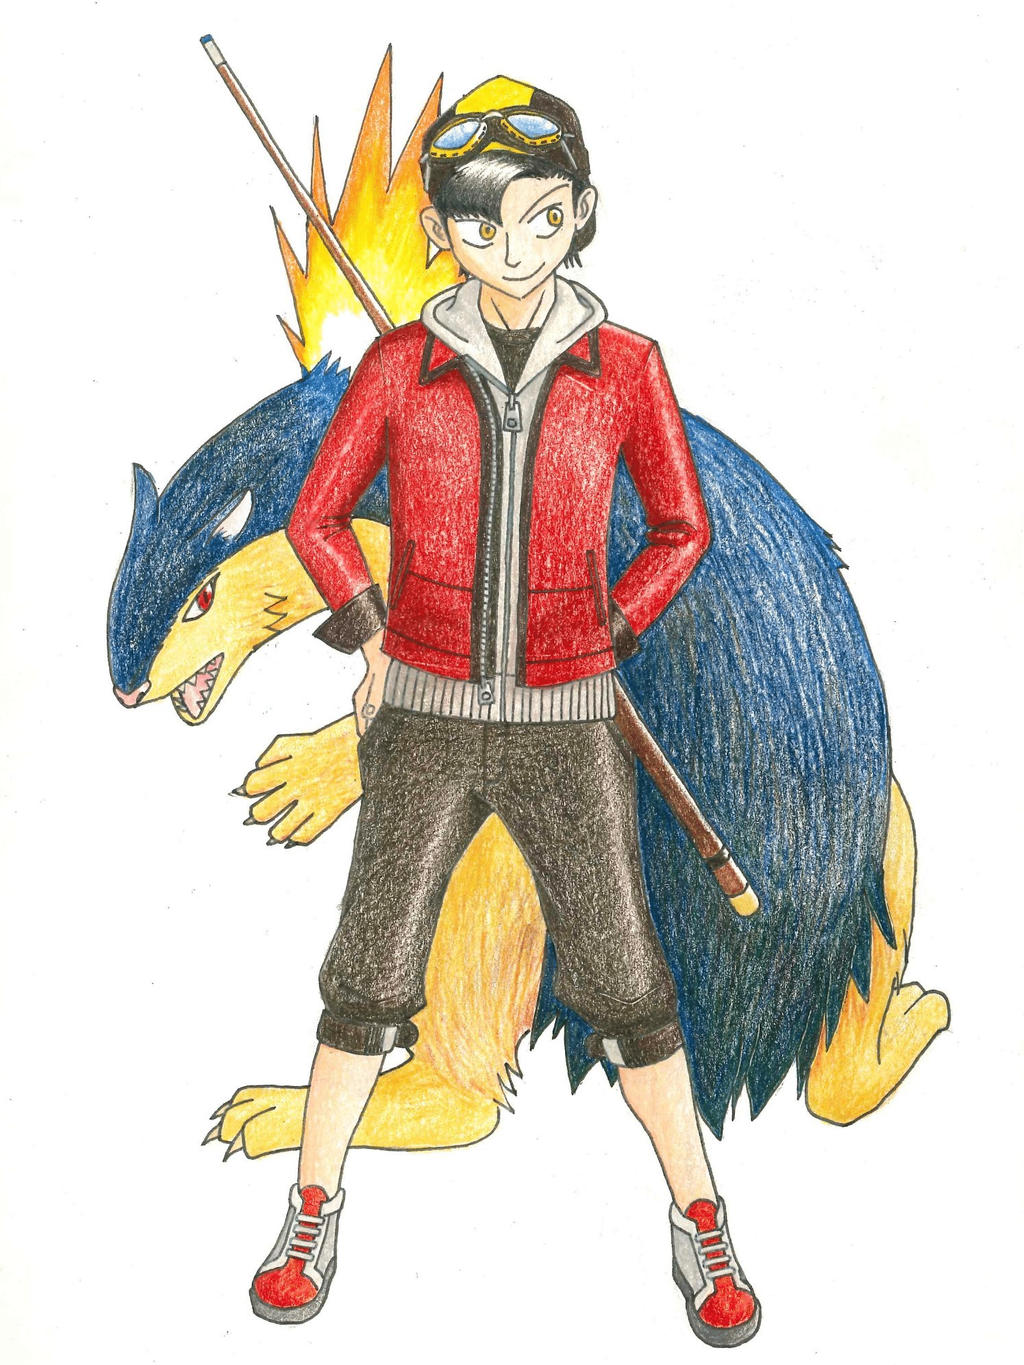 gold_and_typhlosion_by_unownzone-dau01at.jpg